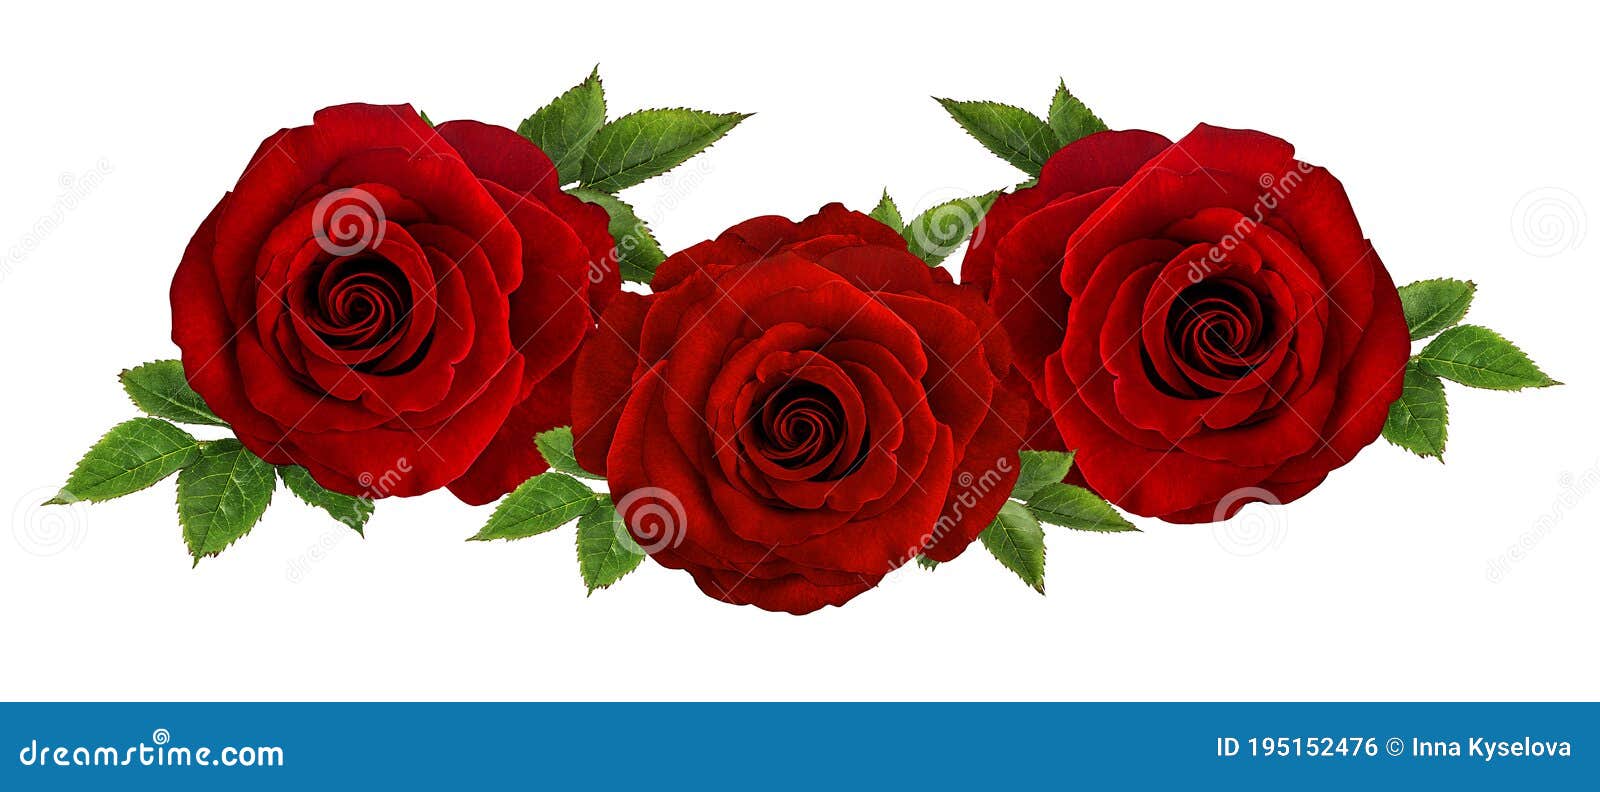 Roses isolated on white stock photo. Image of green - 195152476